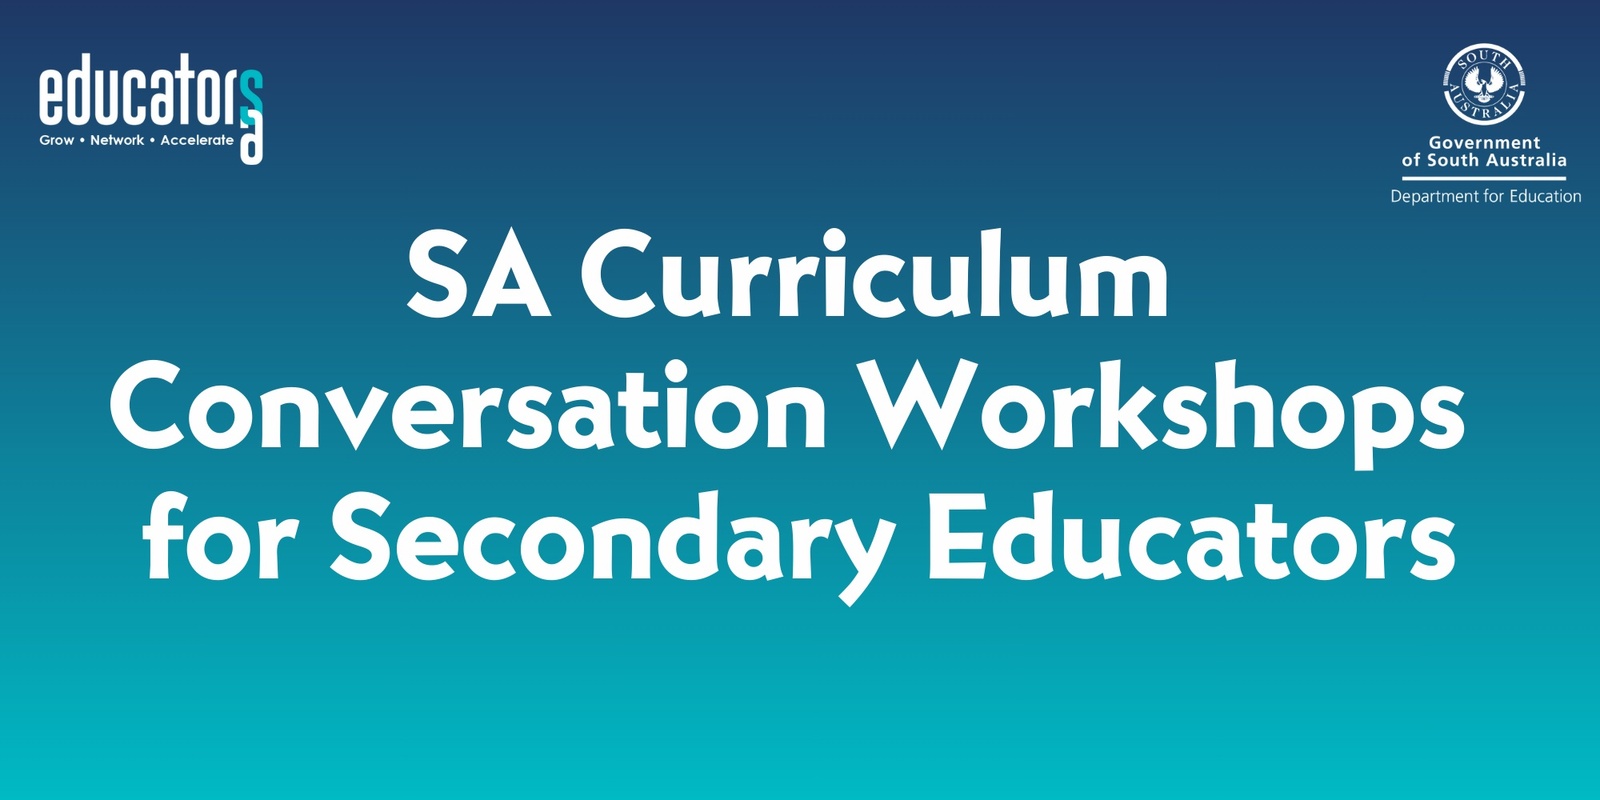 Banner image for SA Curriculum Conversation Workshops for Secondary Educators 